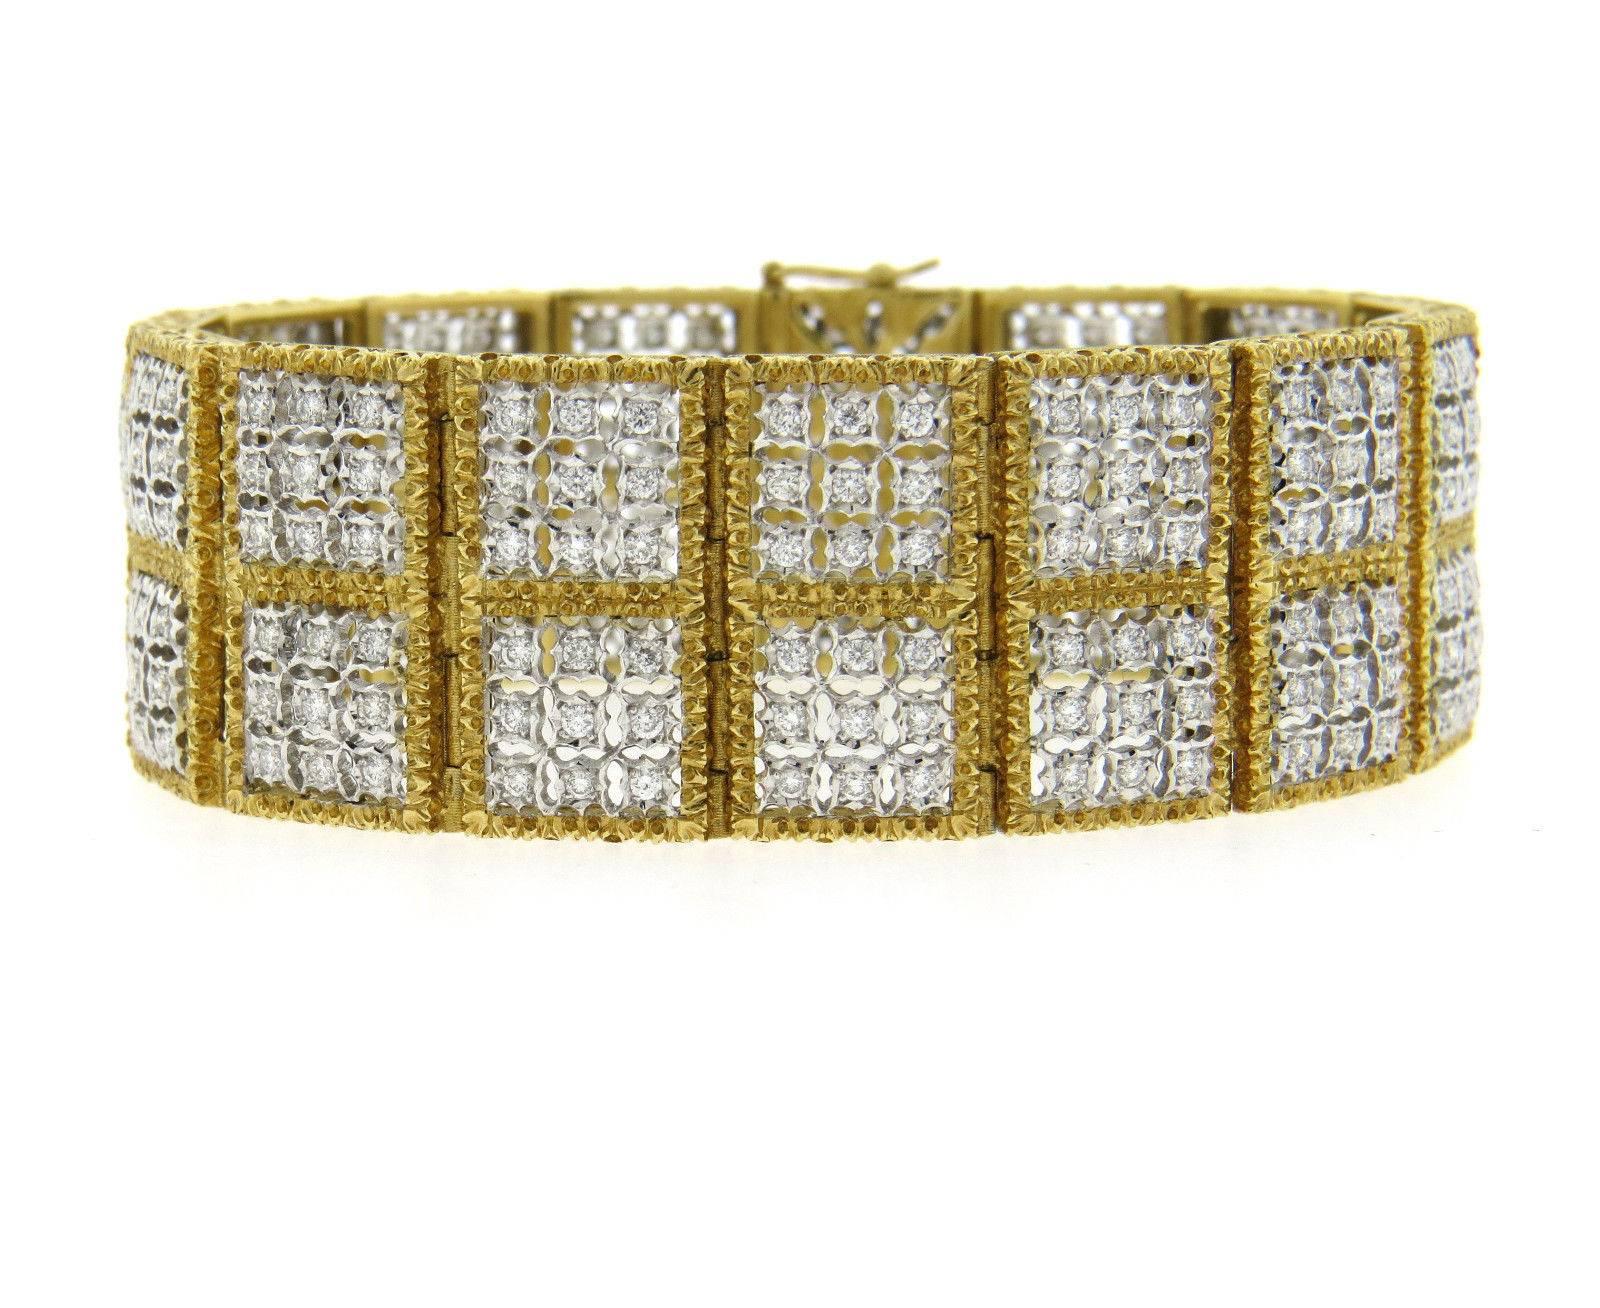 An 18k white and yellow gold bracelet set with 2.70ctw of GH/VS diamonds.  The bracelet is 7 1/16